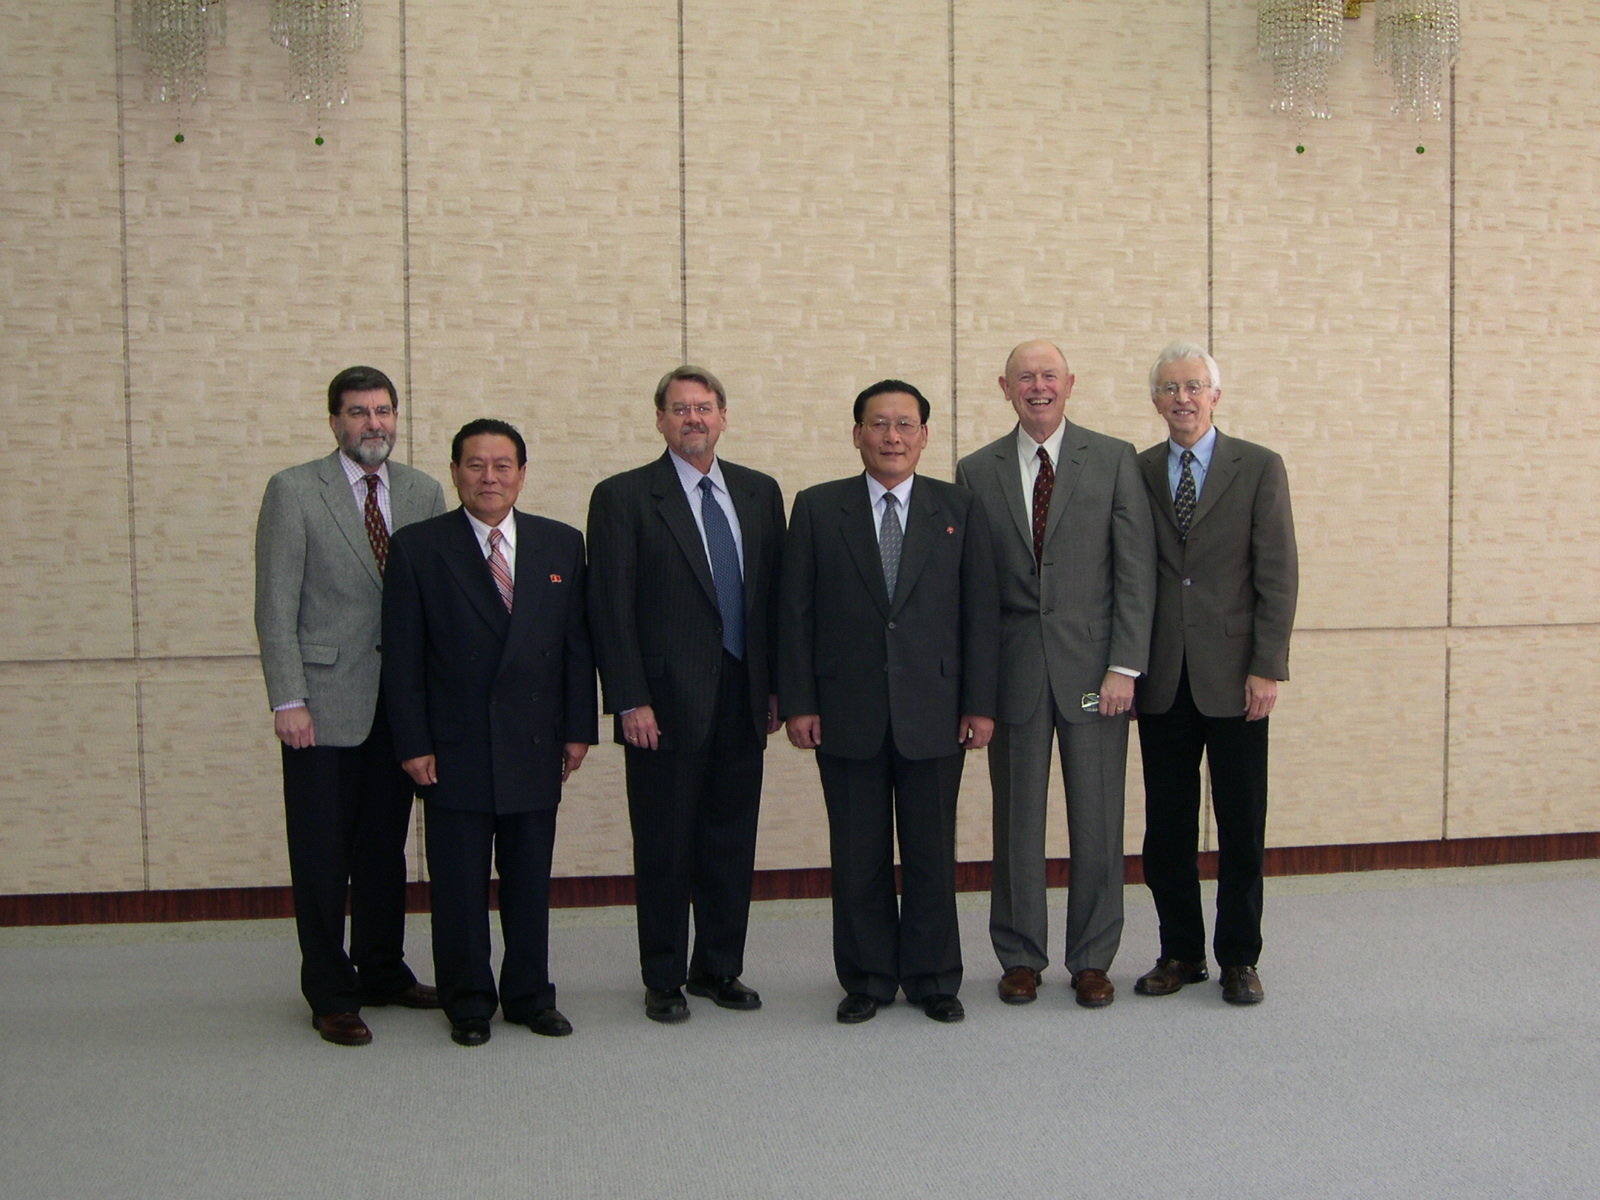 Six men in business suits posing for picture.